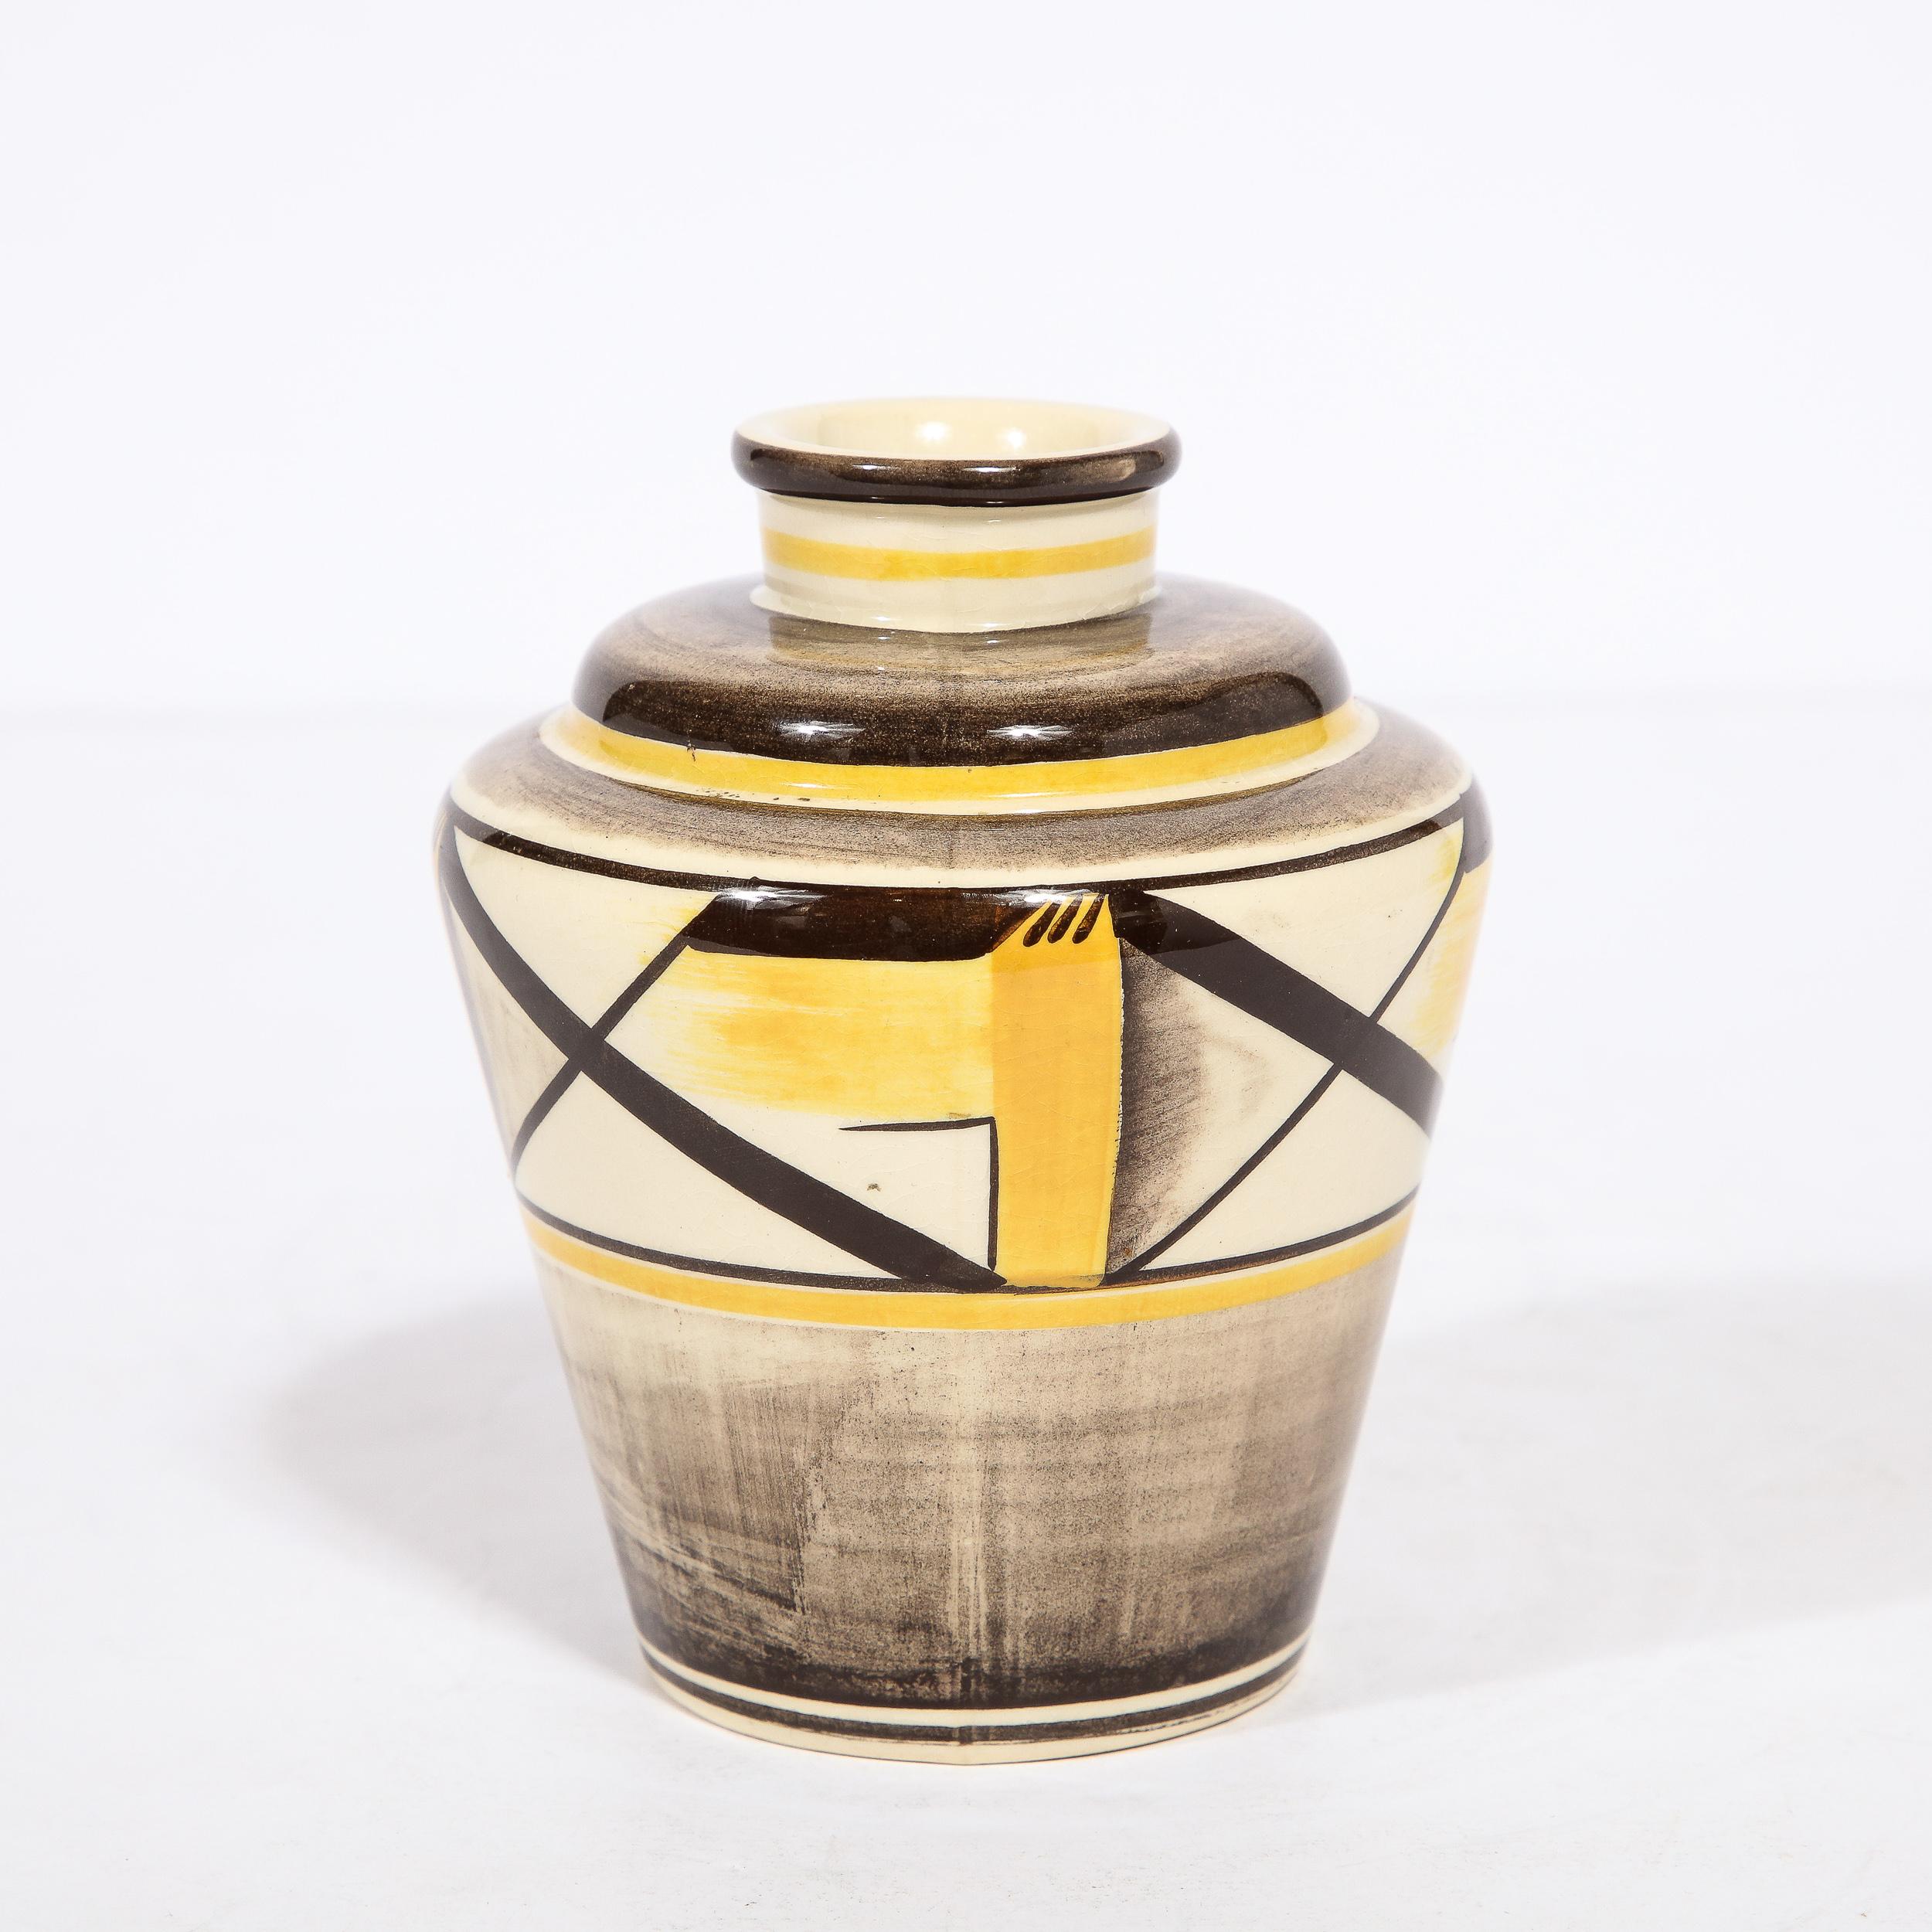 Art Deco Ceramic Vase with Hand-Painted Detailing by Arthur Percy for Gefle In Excellent Condition For Sale In New York, NY